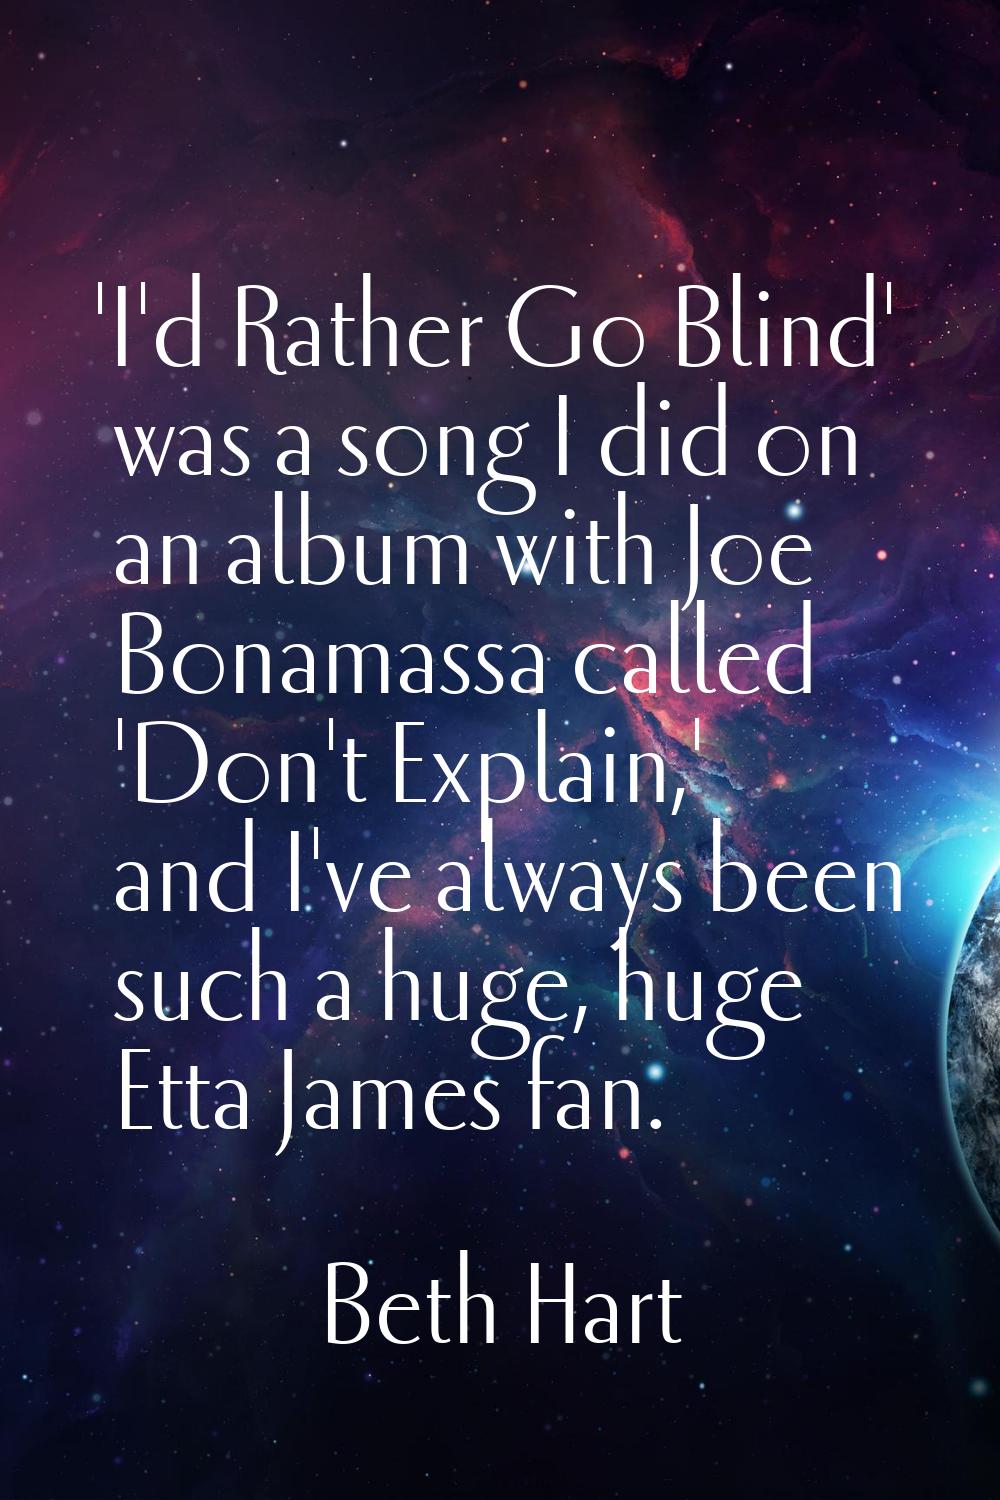 'I'd Rather Go Blind' was a song I did on an album with Joe Bonamassa called 'Don't Explain,' and I